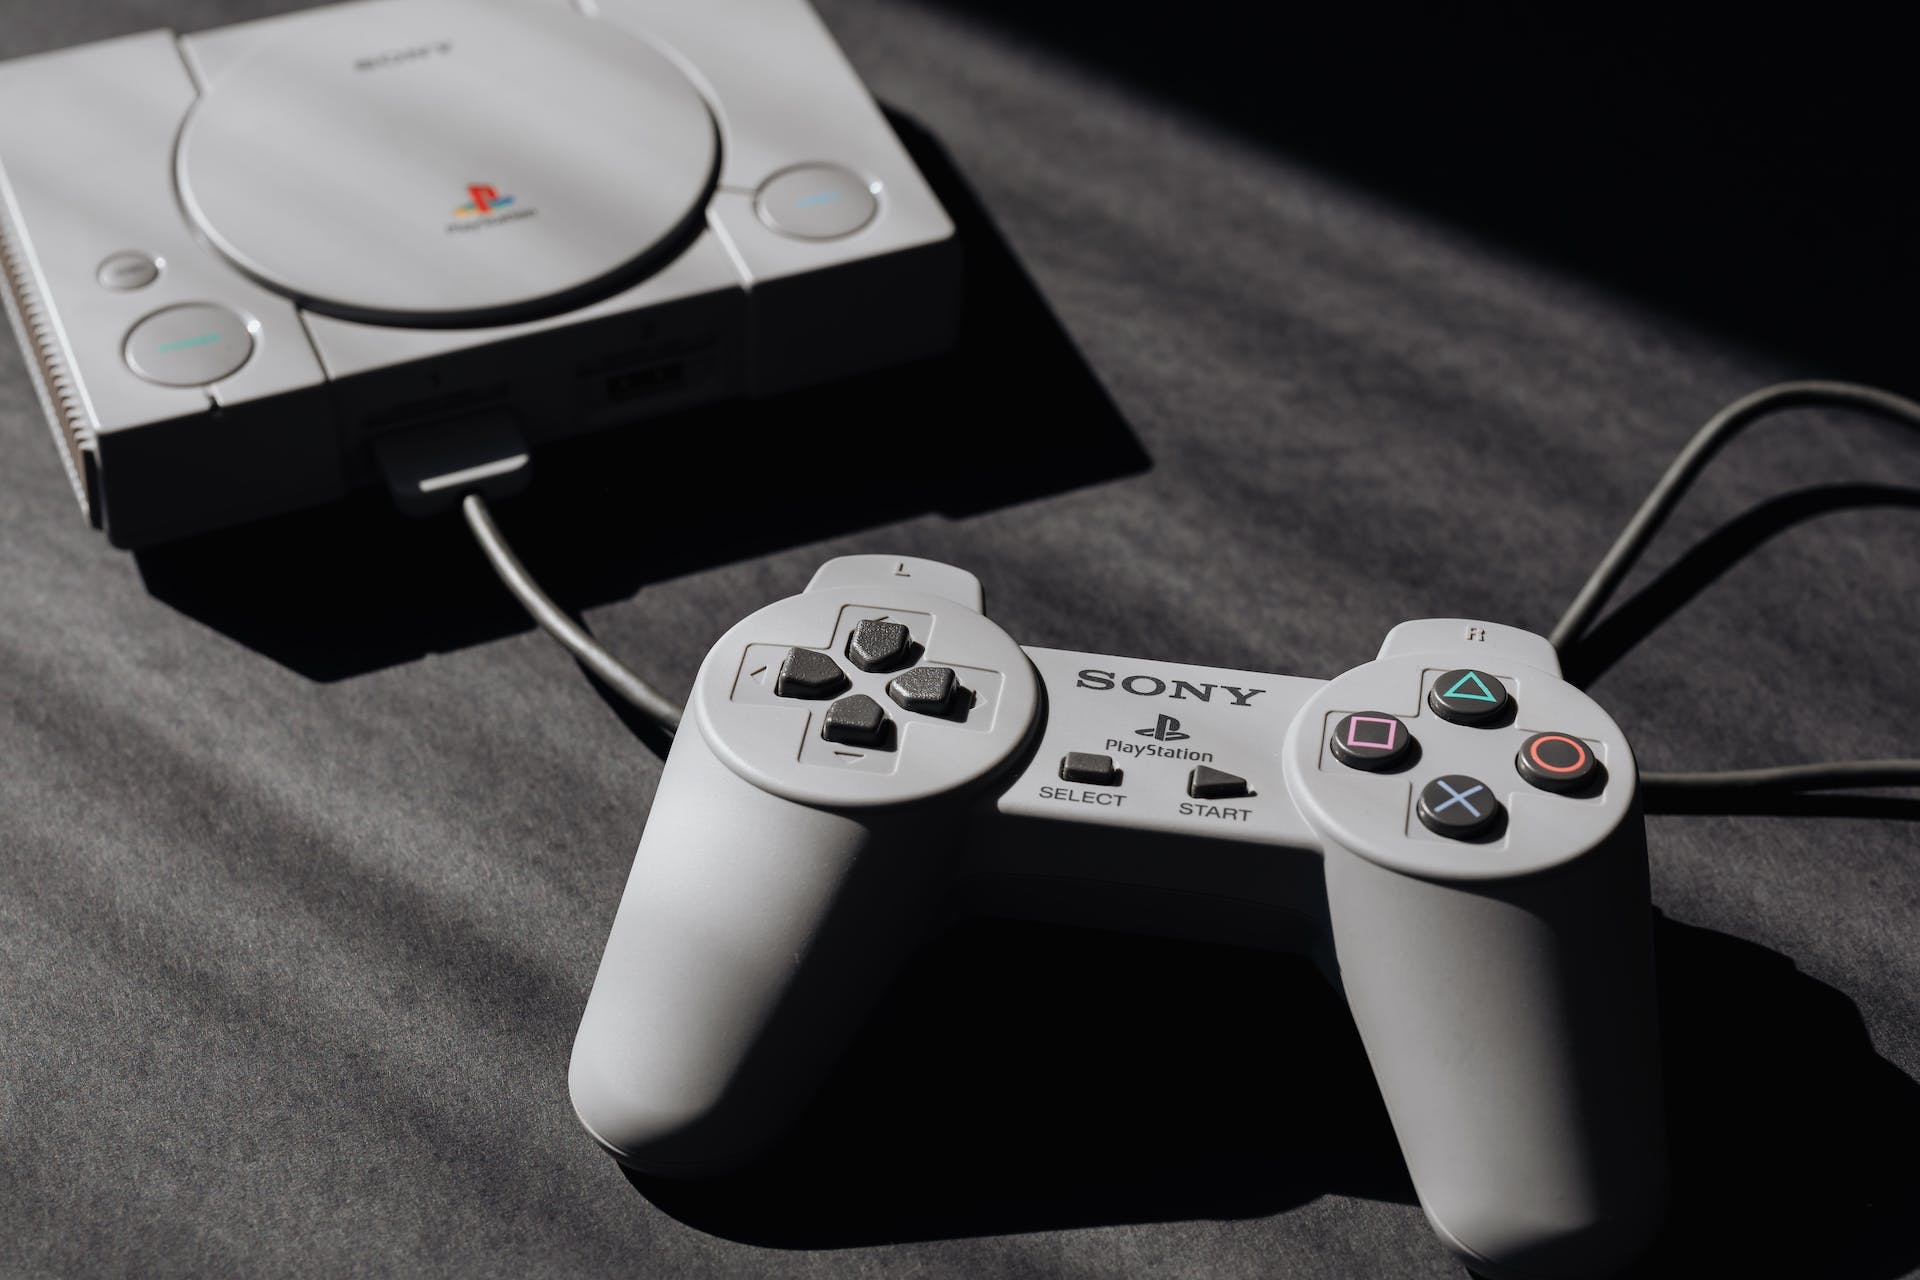 A PlayStation and its controller | Source: Pexels